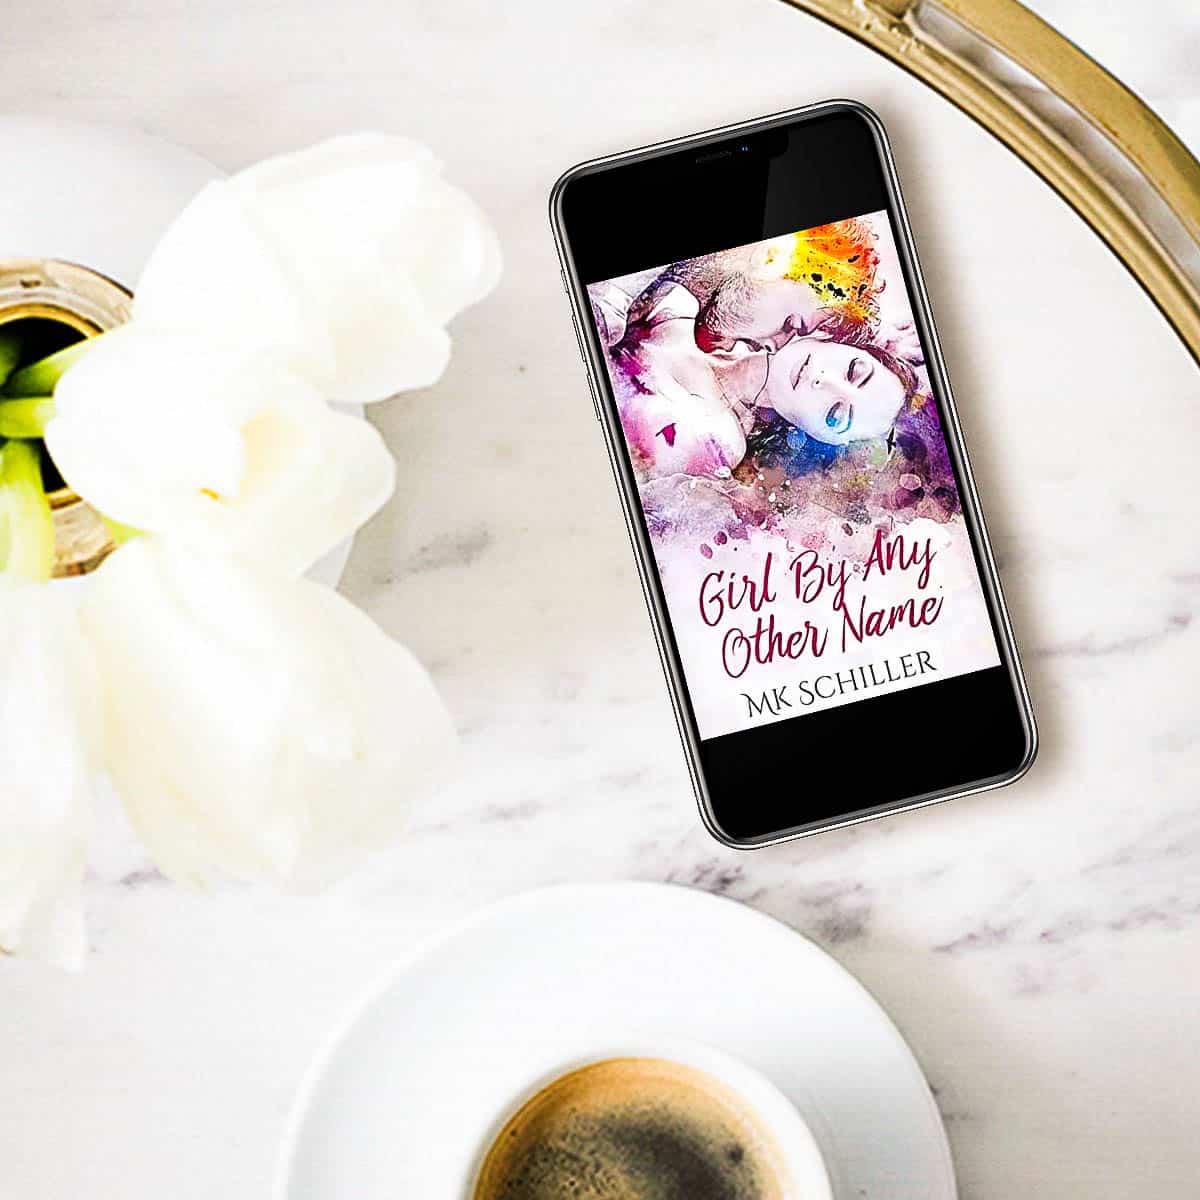 Girl By Any Other Name by MK Schiller – Unexpected and Suspenseful!